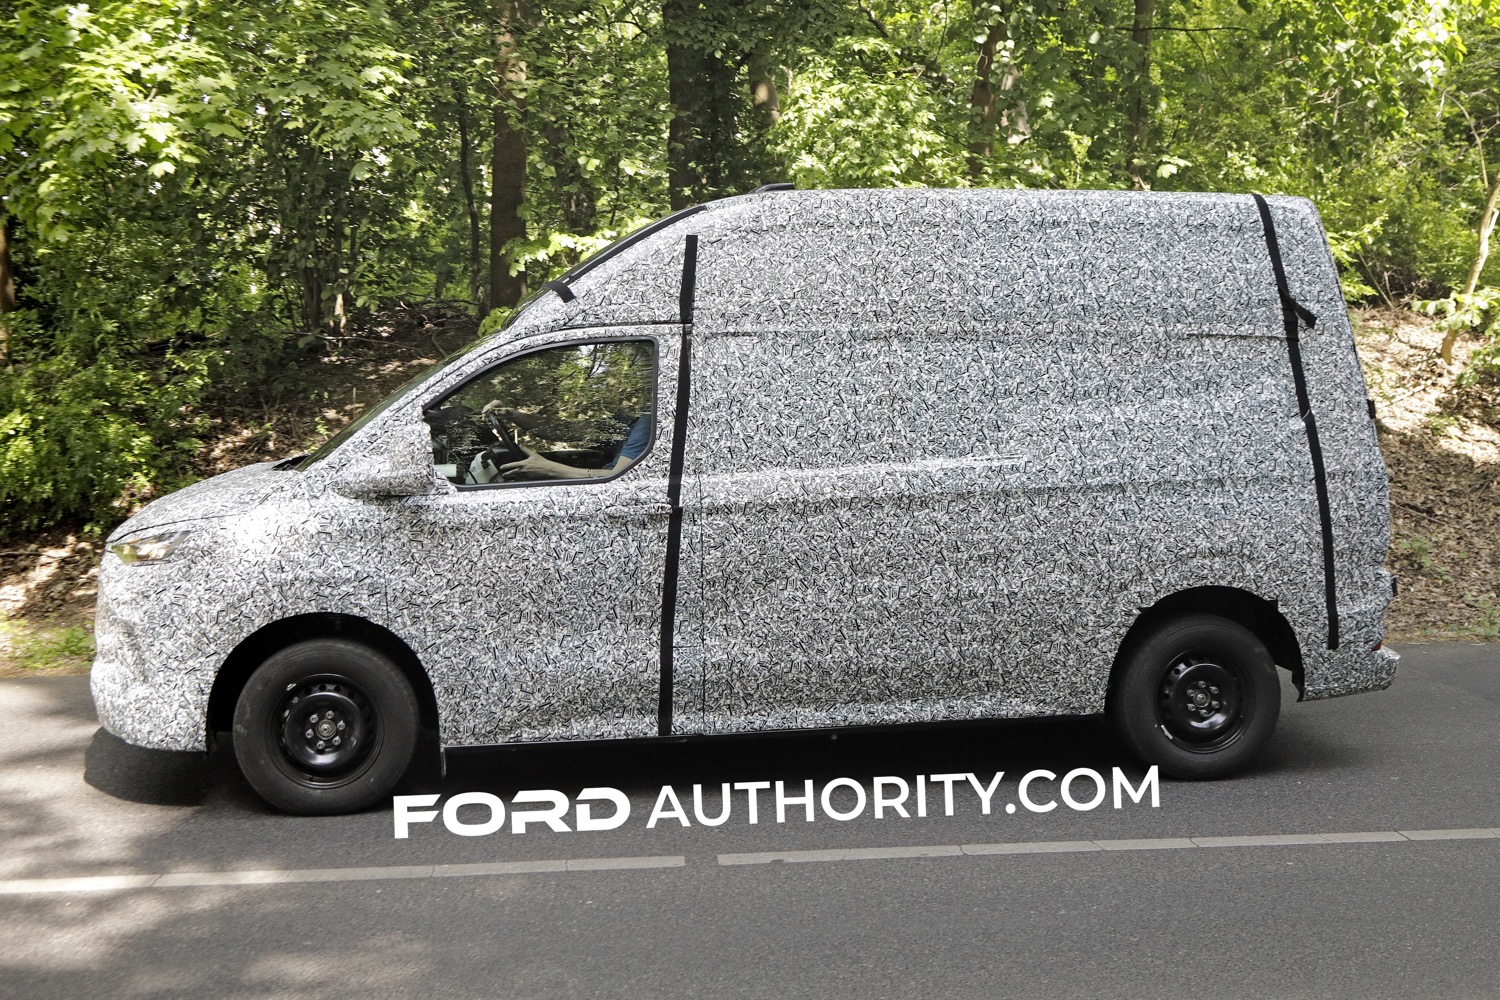 Not For Us: Ford Transit Custom Cargo Van Launching in Europe